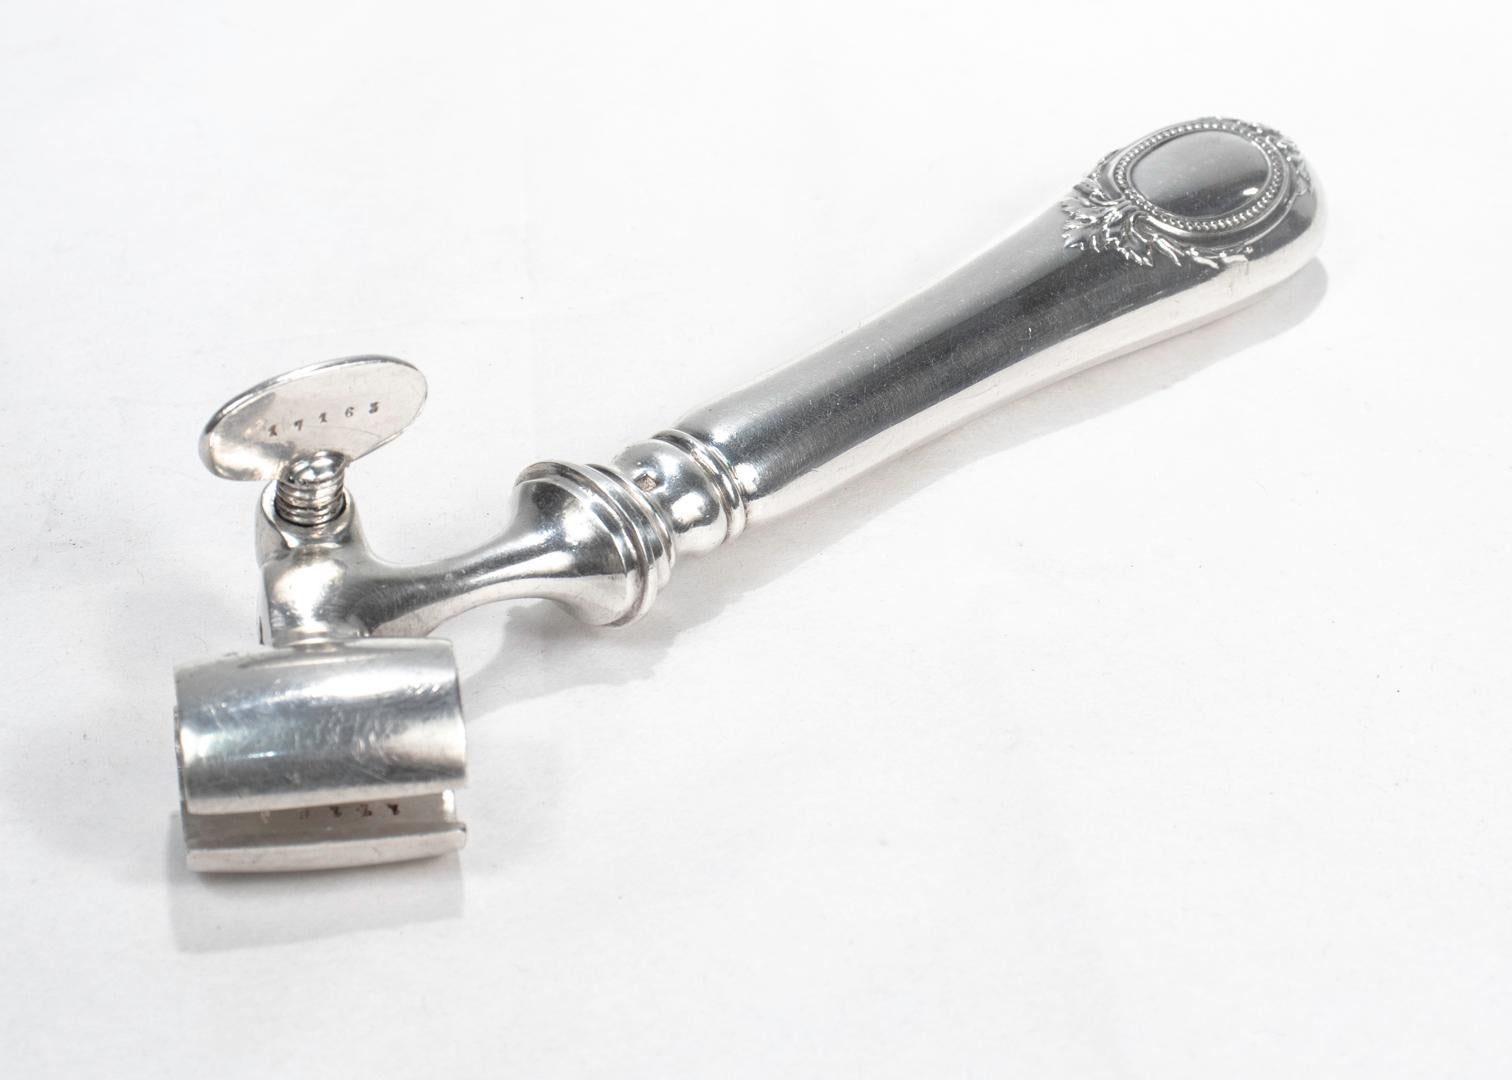 Antique Christofle Silverplate Baguette Manche a Gigot Lamb Shank / Roast Holder In Good Condition For Sale In Philadelphia, PA